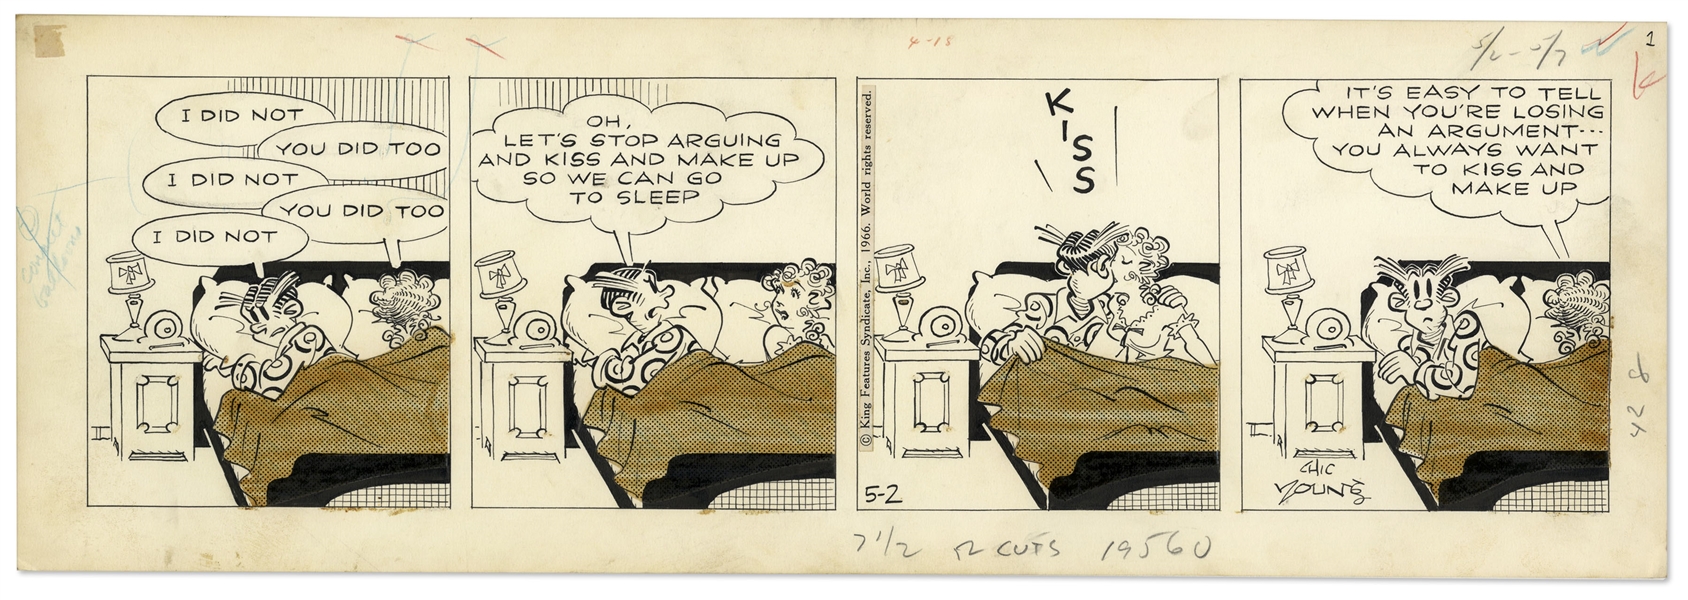 2 Chic Young Hand-Drawn ''Blondie'' Comic Strips From 1966